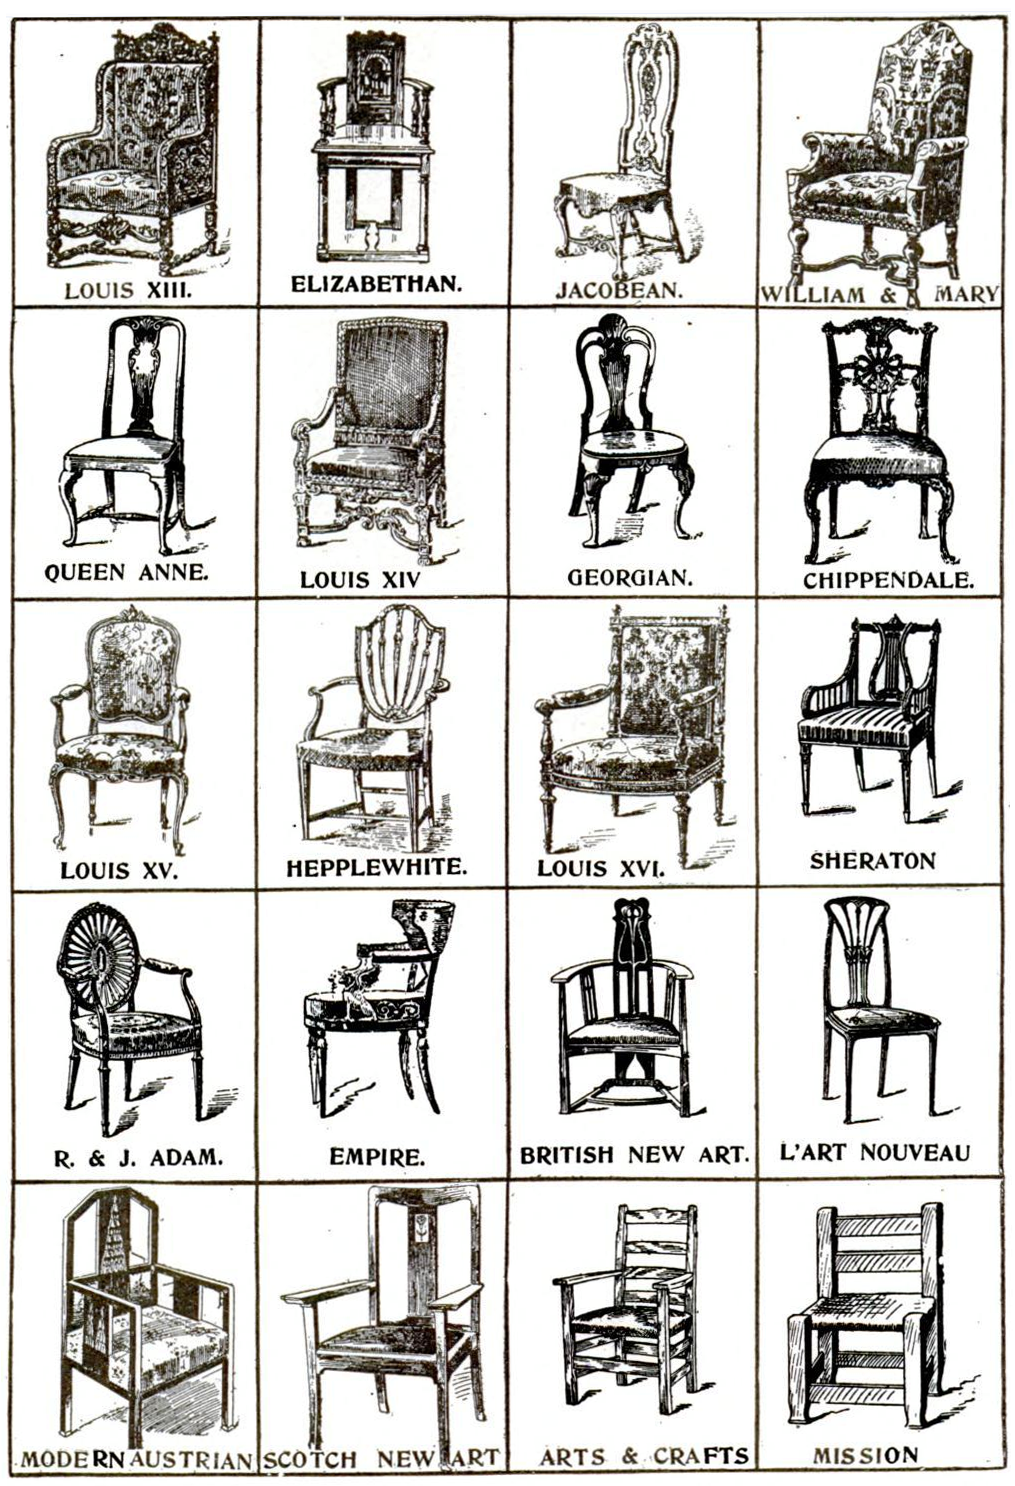 40 Styles of Chairs | Prop Agenda